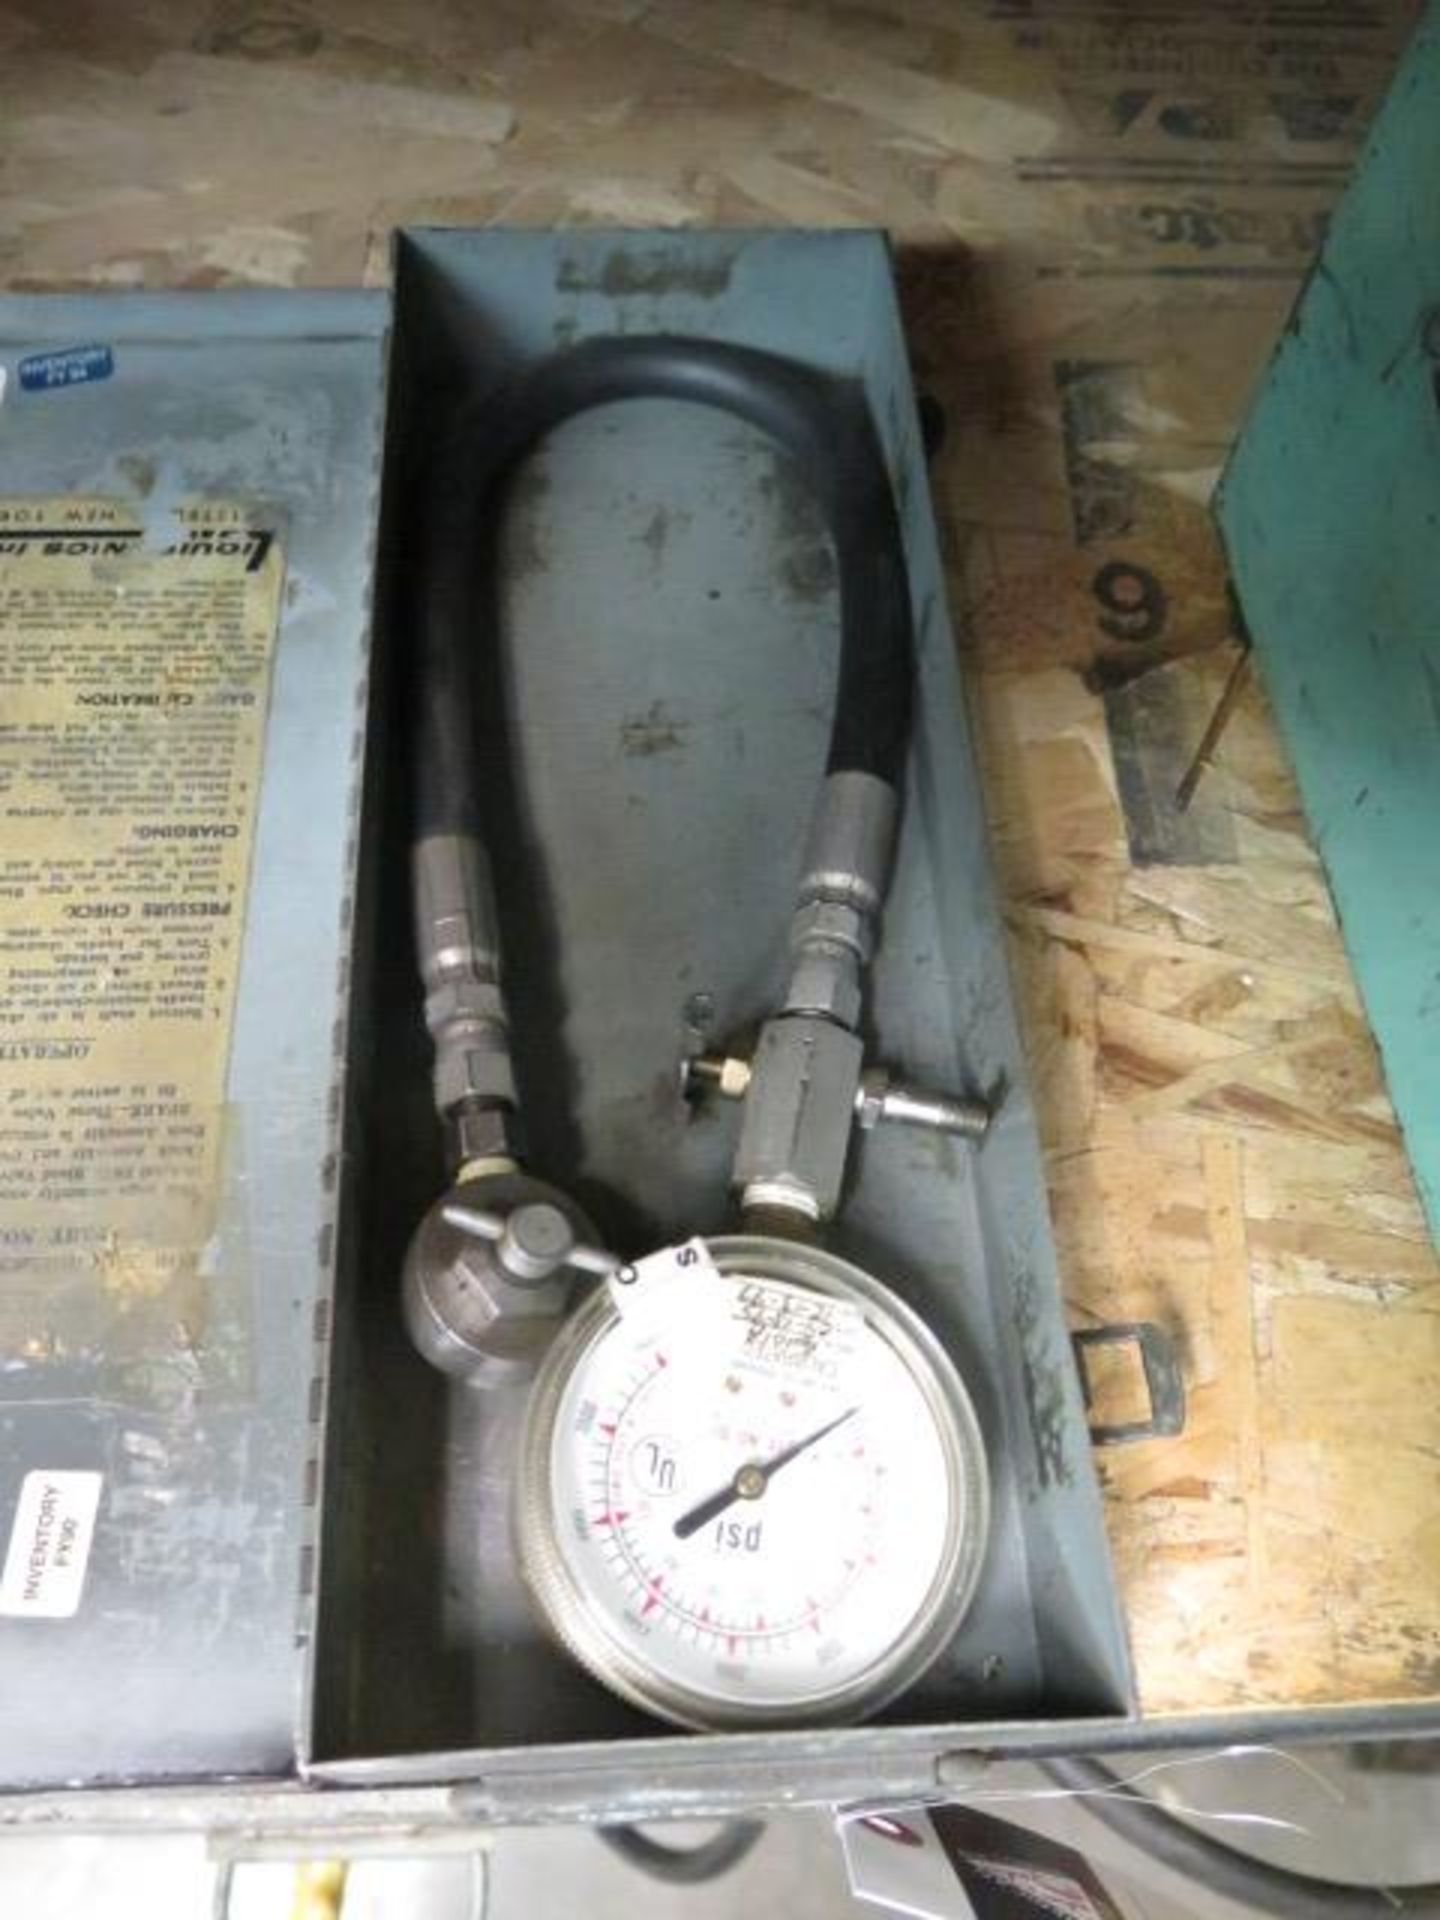 Ametek T-3A Comparator Pressure Tester and 4000 PSI Prssure Gage (SOLD AS-IS - NO WARRANTY) - Image 7 of 7